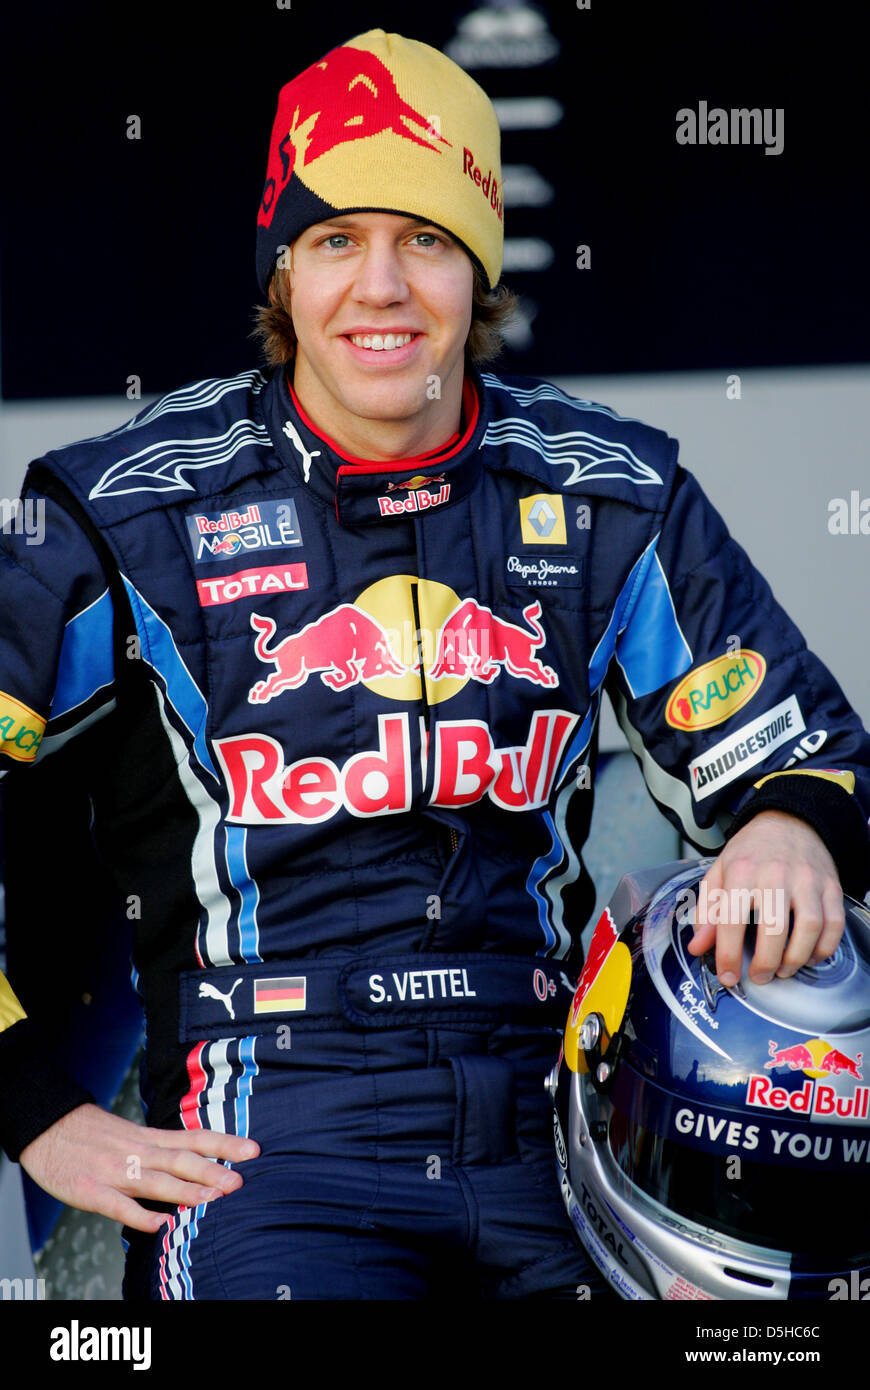 German Formula One driver Sebastian Vettel of Red Bull presents the new Red Bull Racing race car RB6 in Jerez de la Frontera, Spain, 10 February 2010. Vice world champion Vettel will test the RB6 for the first time on 12 February 2010. The Formula One 2010 season will start on 14 March 2010 in Bahrain. Photo: Felix Heyder Stock Photo